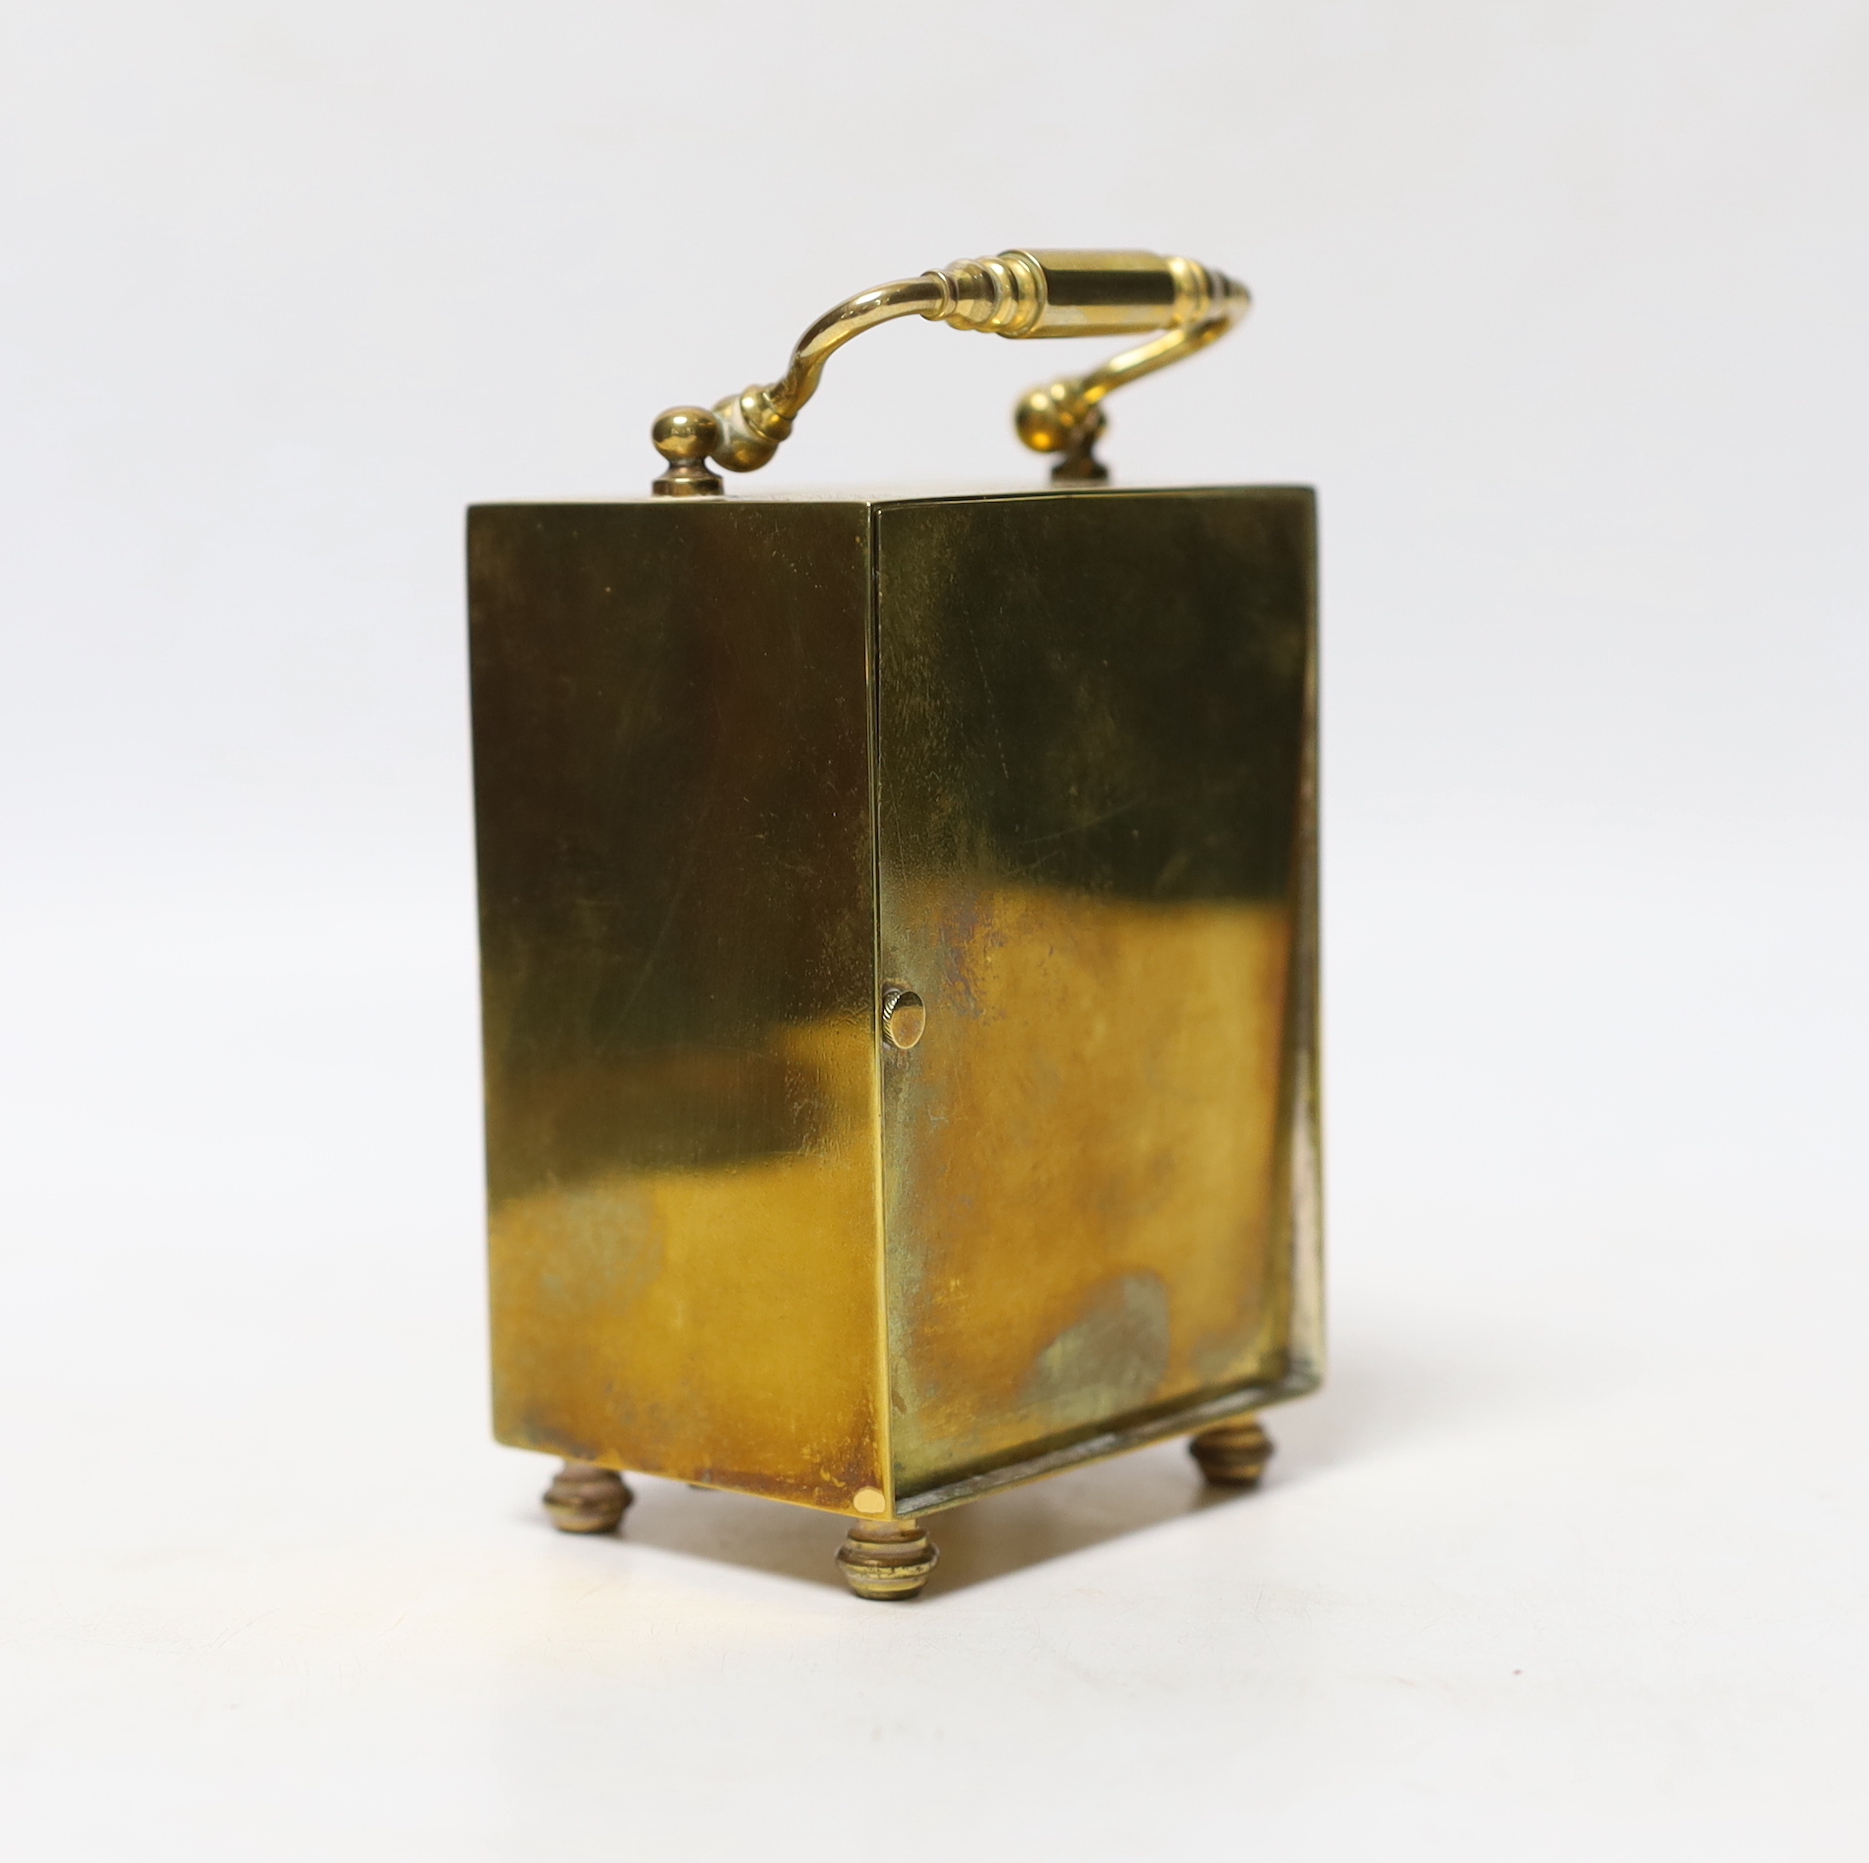 Alexander Clark, a brass carriage timepiece, 10cm, in fitted case